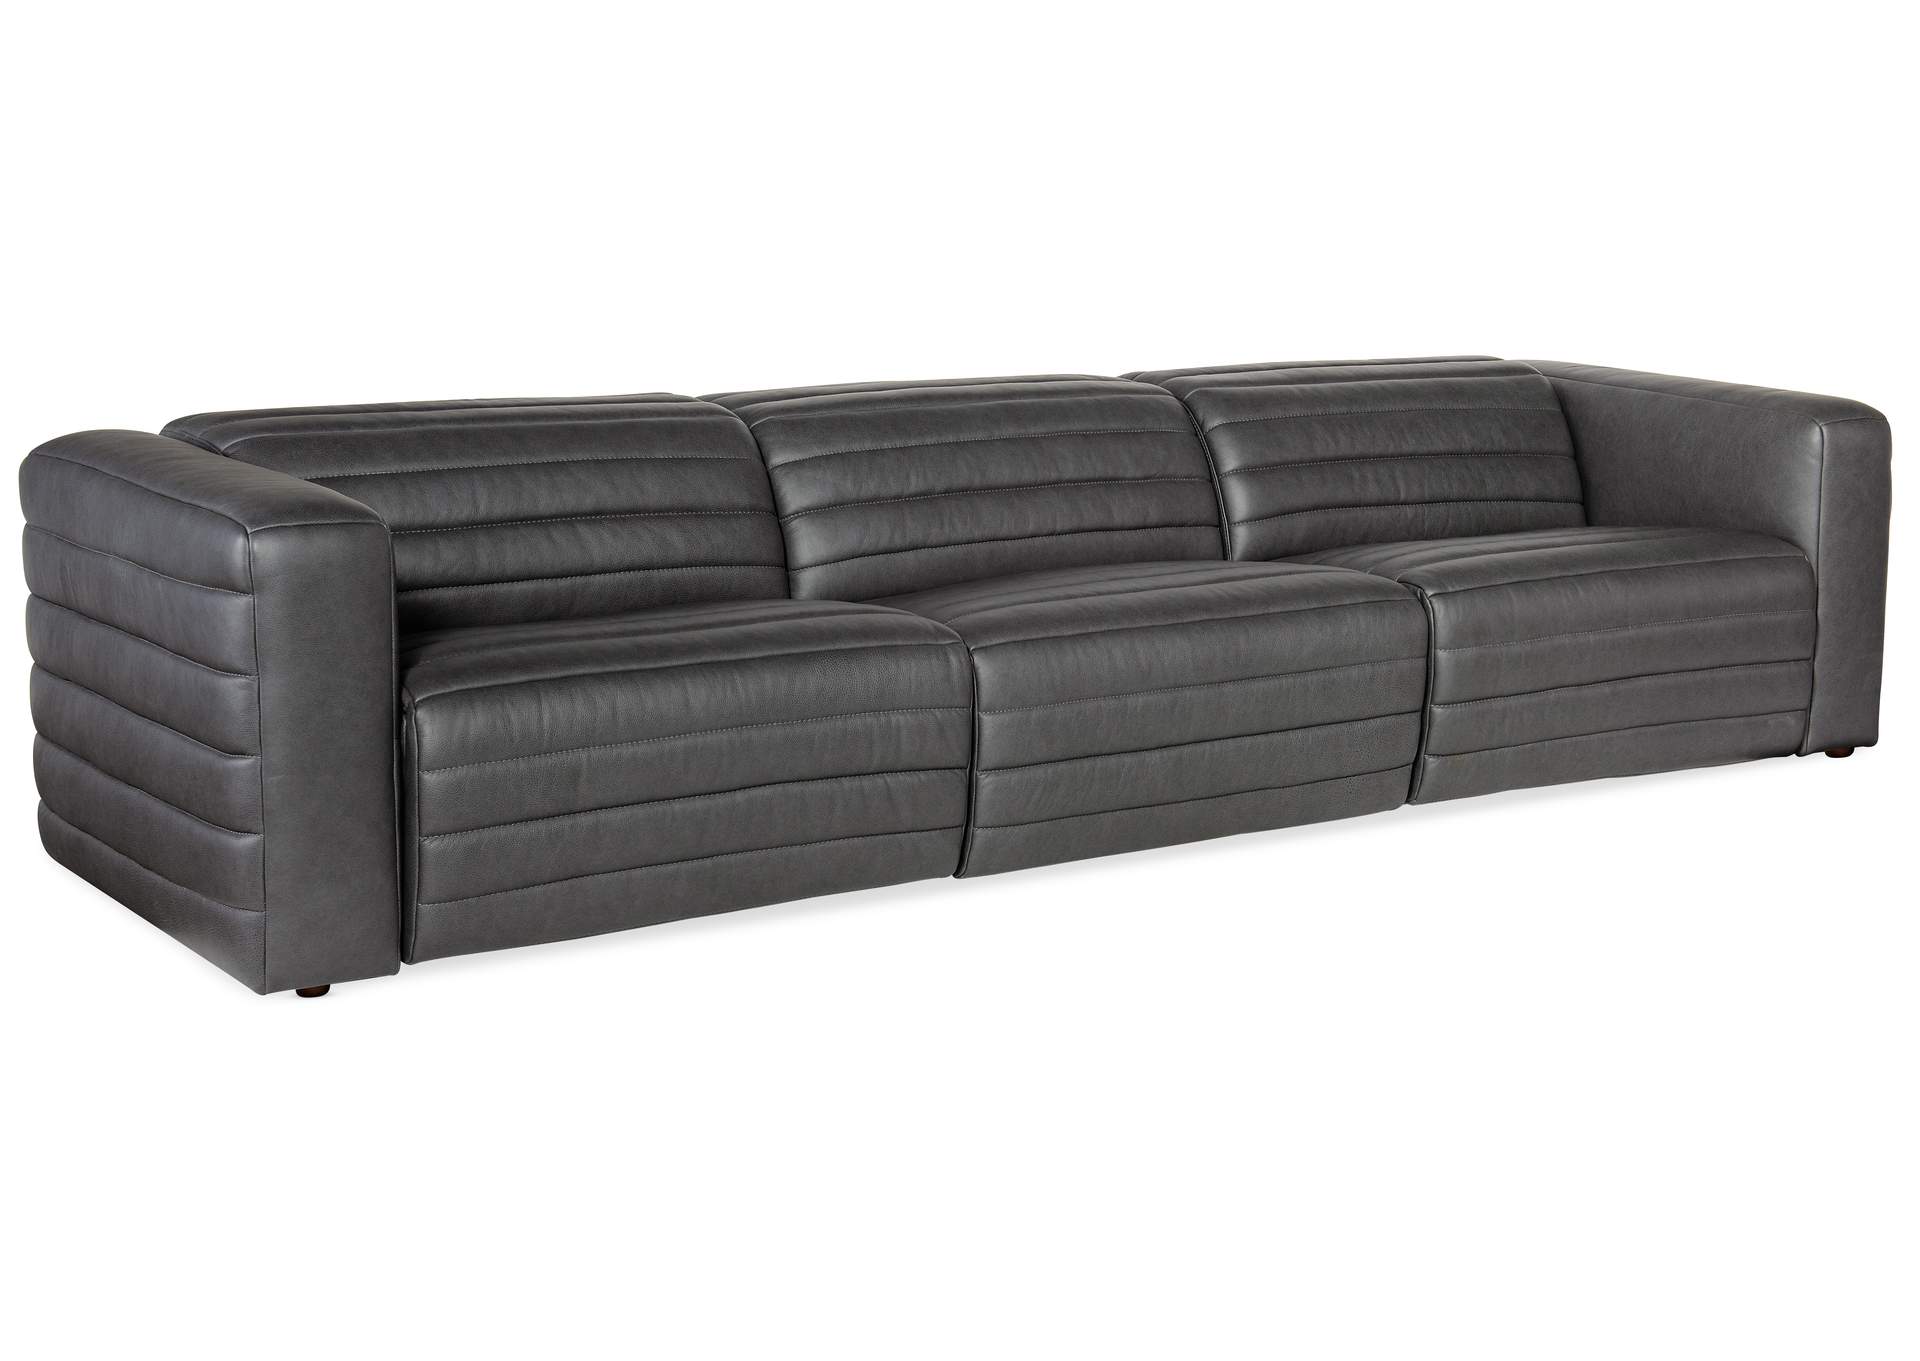 Chatelain 3-Piece Power Sofa with Power Headrest,Hooker Furniture